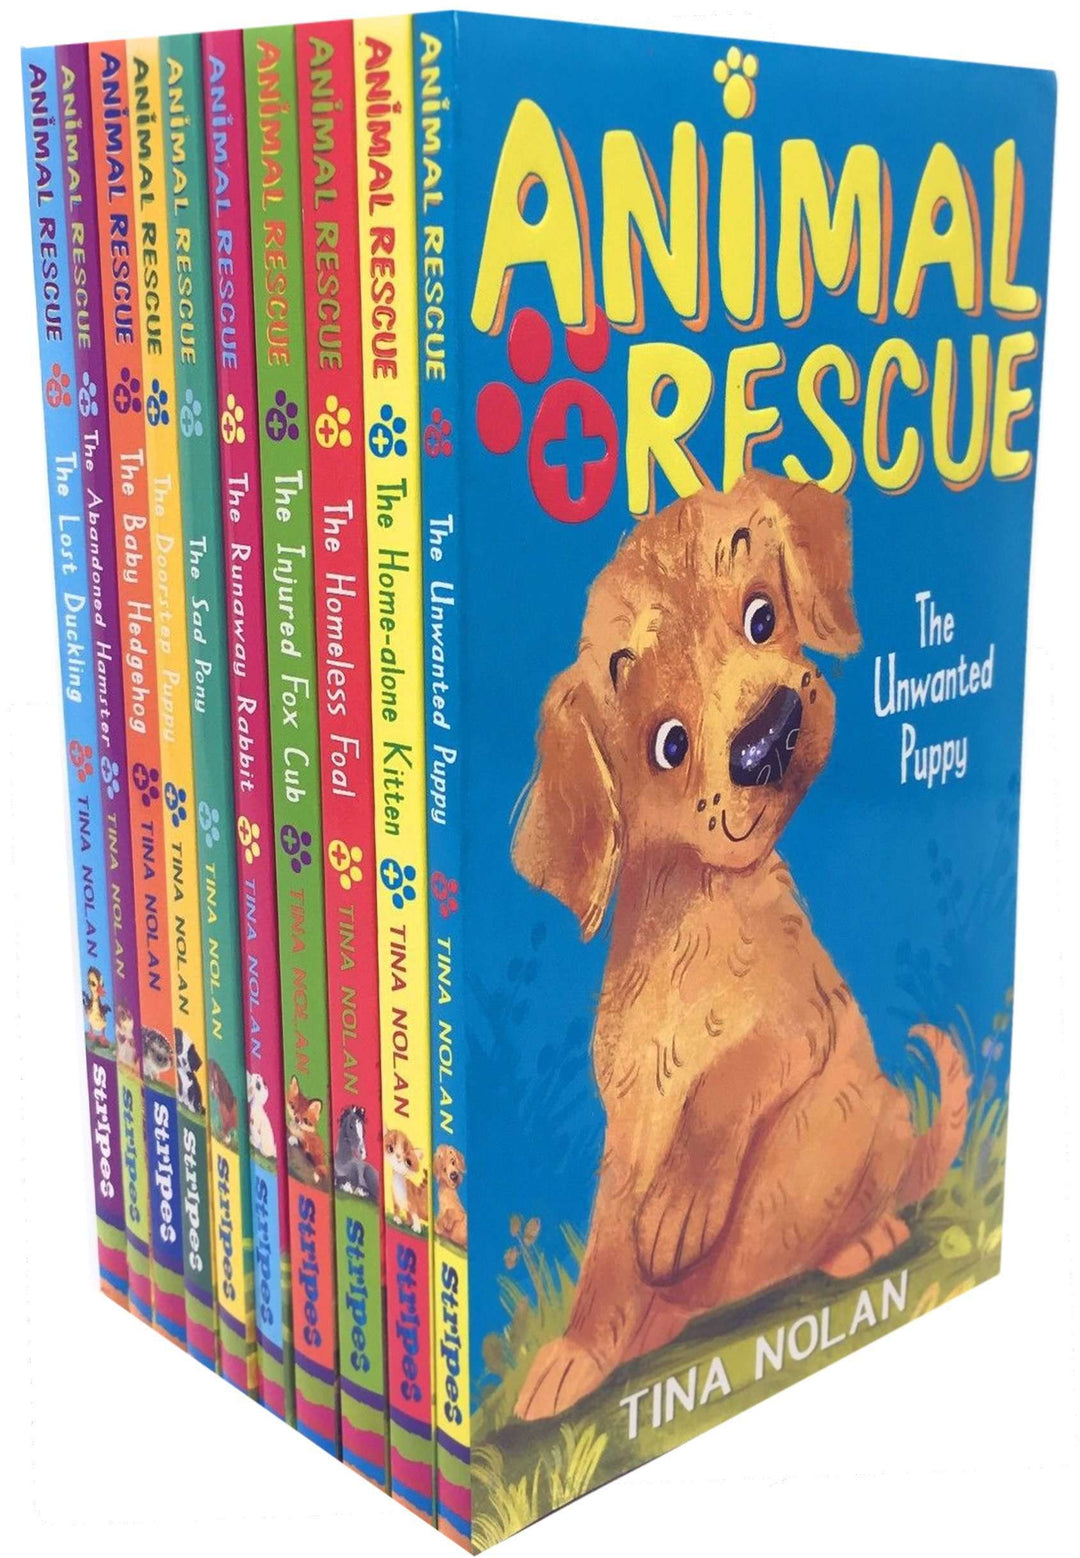 Animal Rescue 10 Books Children Collection Paperback Set By Tina Nolan - St Stephens Books